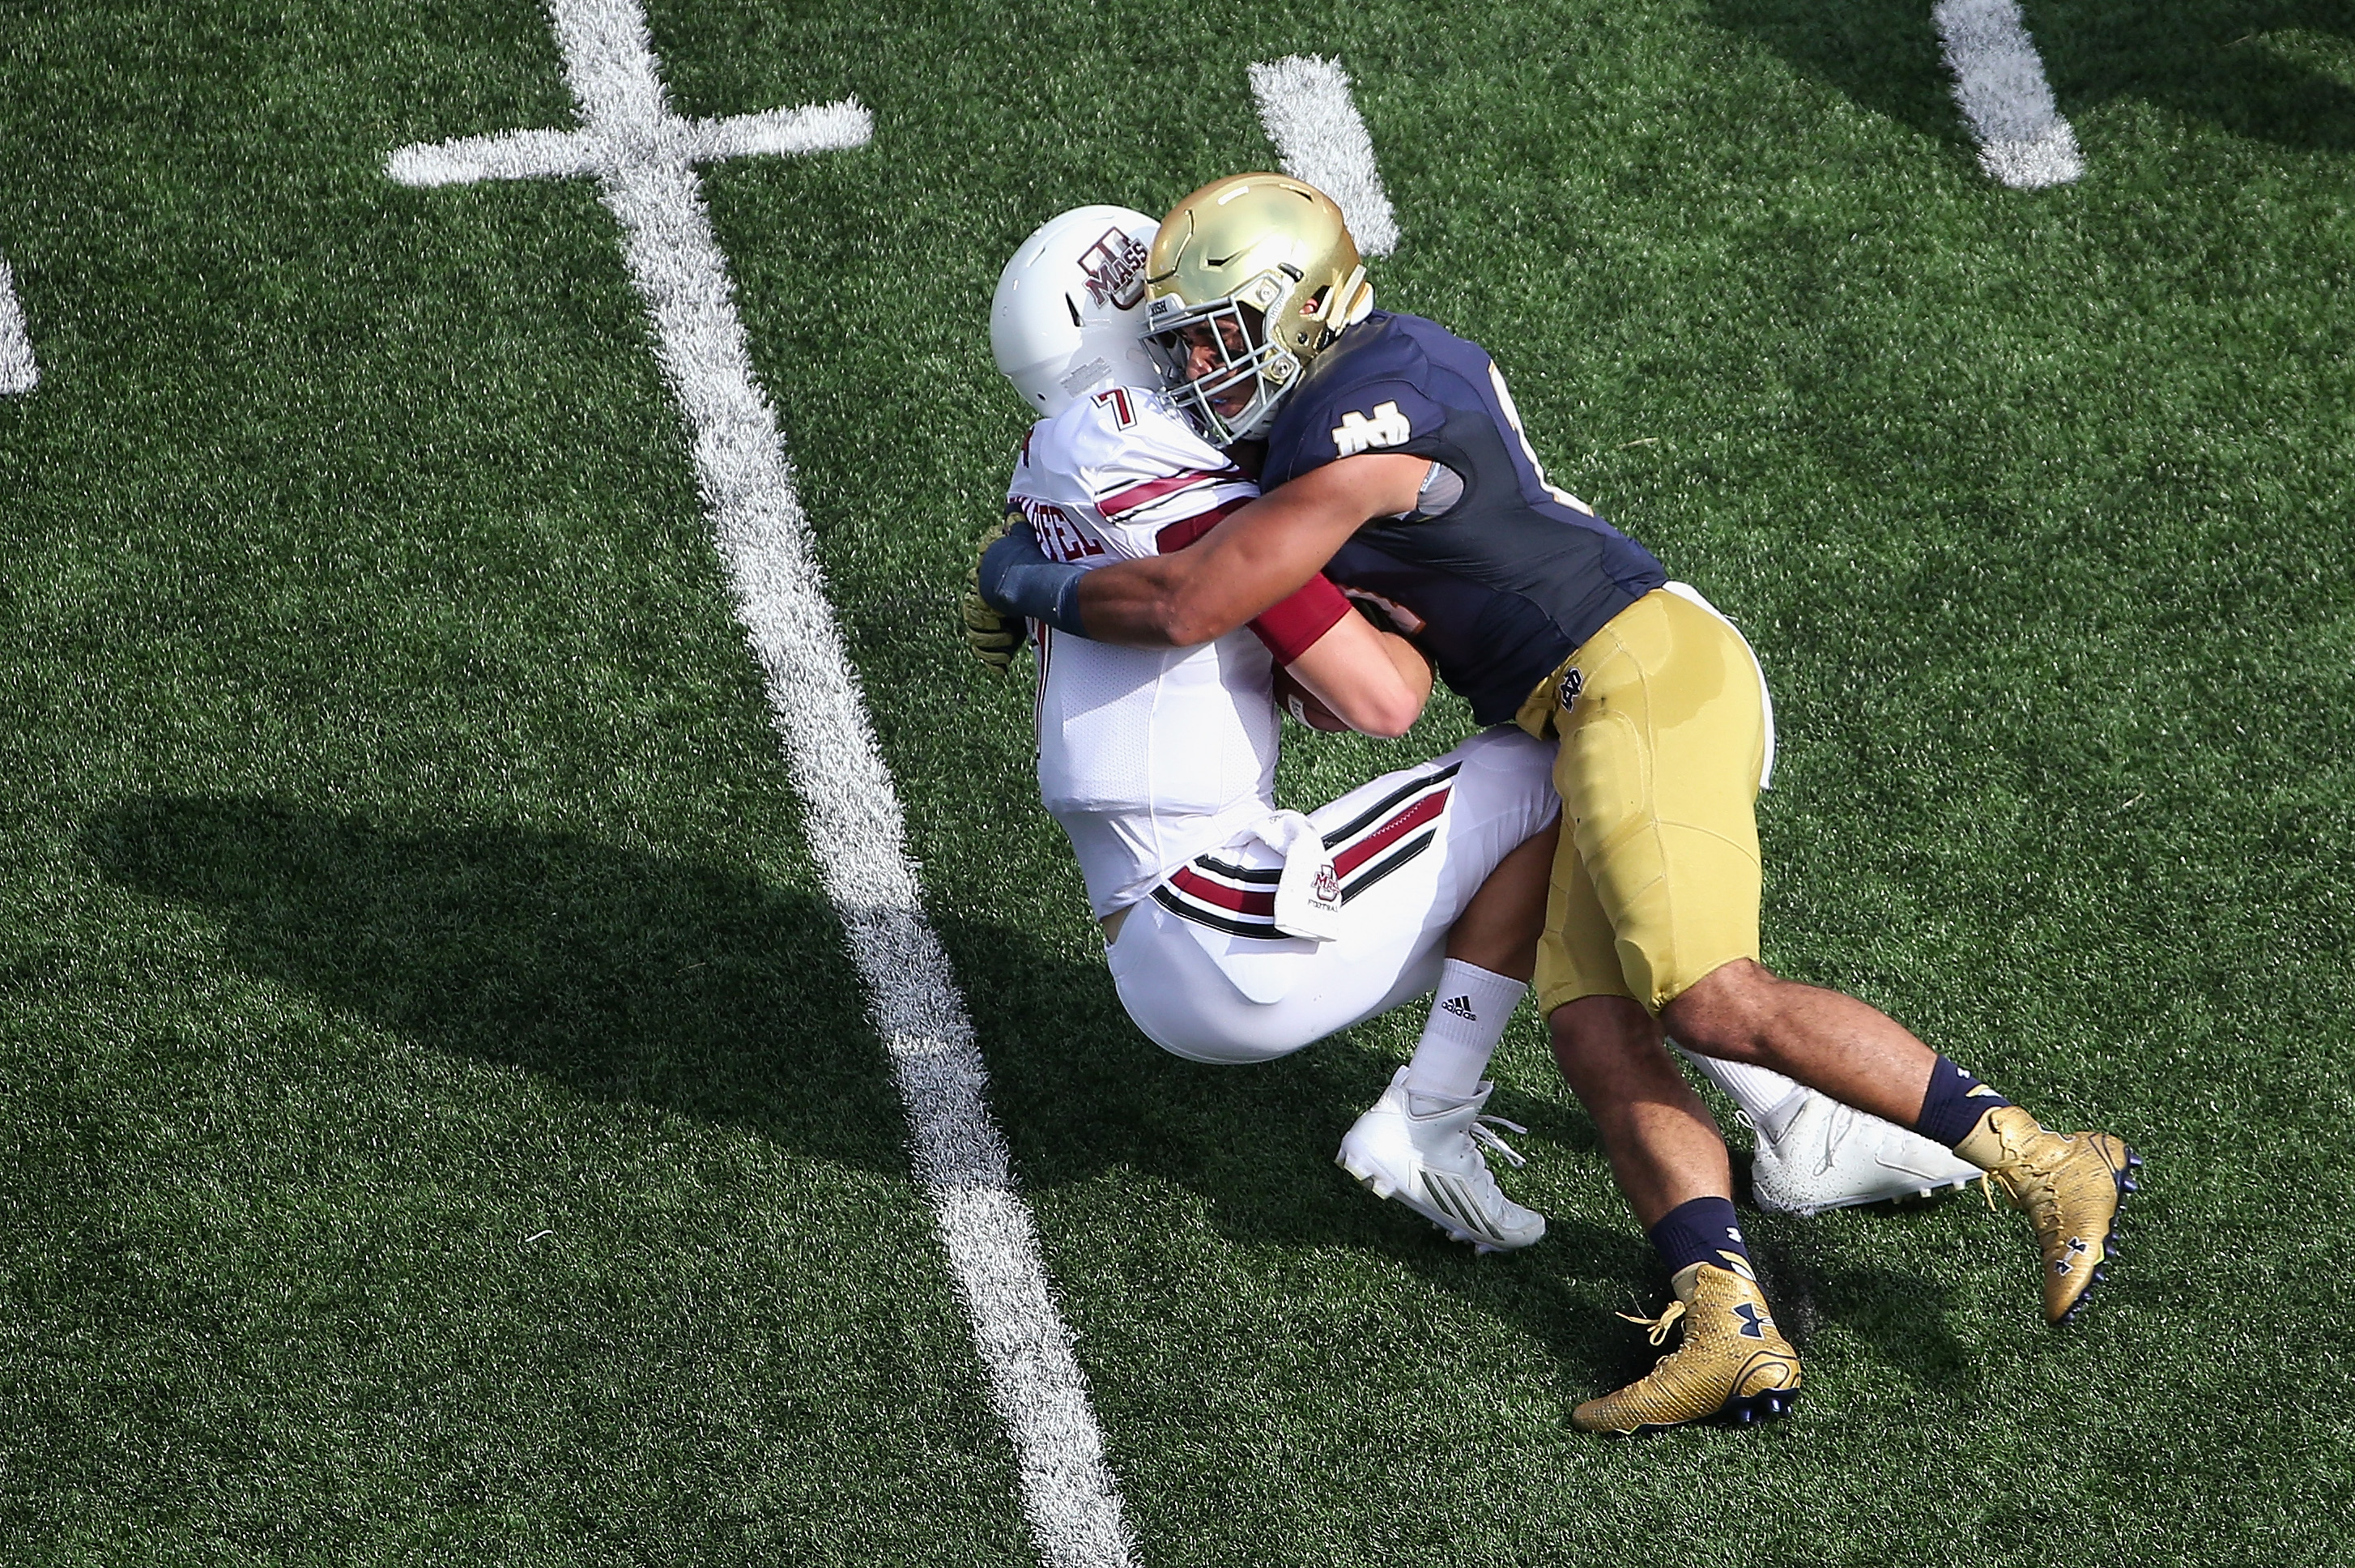 SOUTH BEND, IN - SEPTEMBER 26: Blake Frohnapfel #7 of the Massachusetts Minutemen is sacked by James Onwualu #17 of the Notre Dame Fighting Irish at Notre Dame Stadium on September 26, 2015 in South Bend, Indiana. (Photo by Jonathan Daniel/Getty Images)